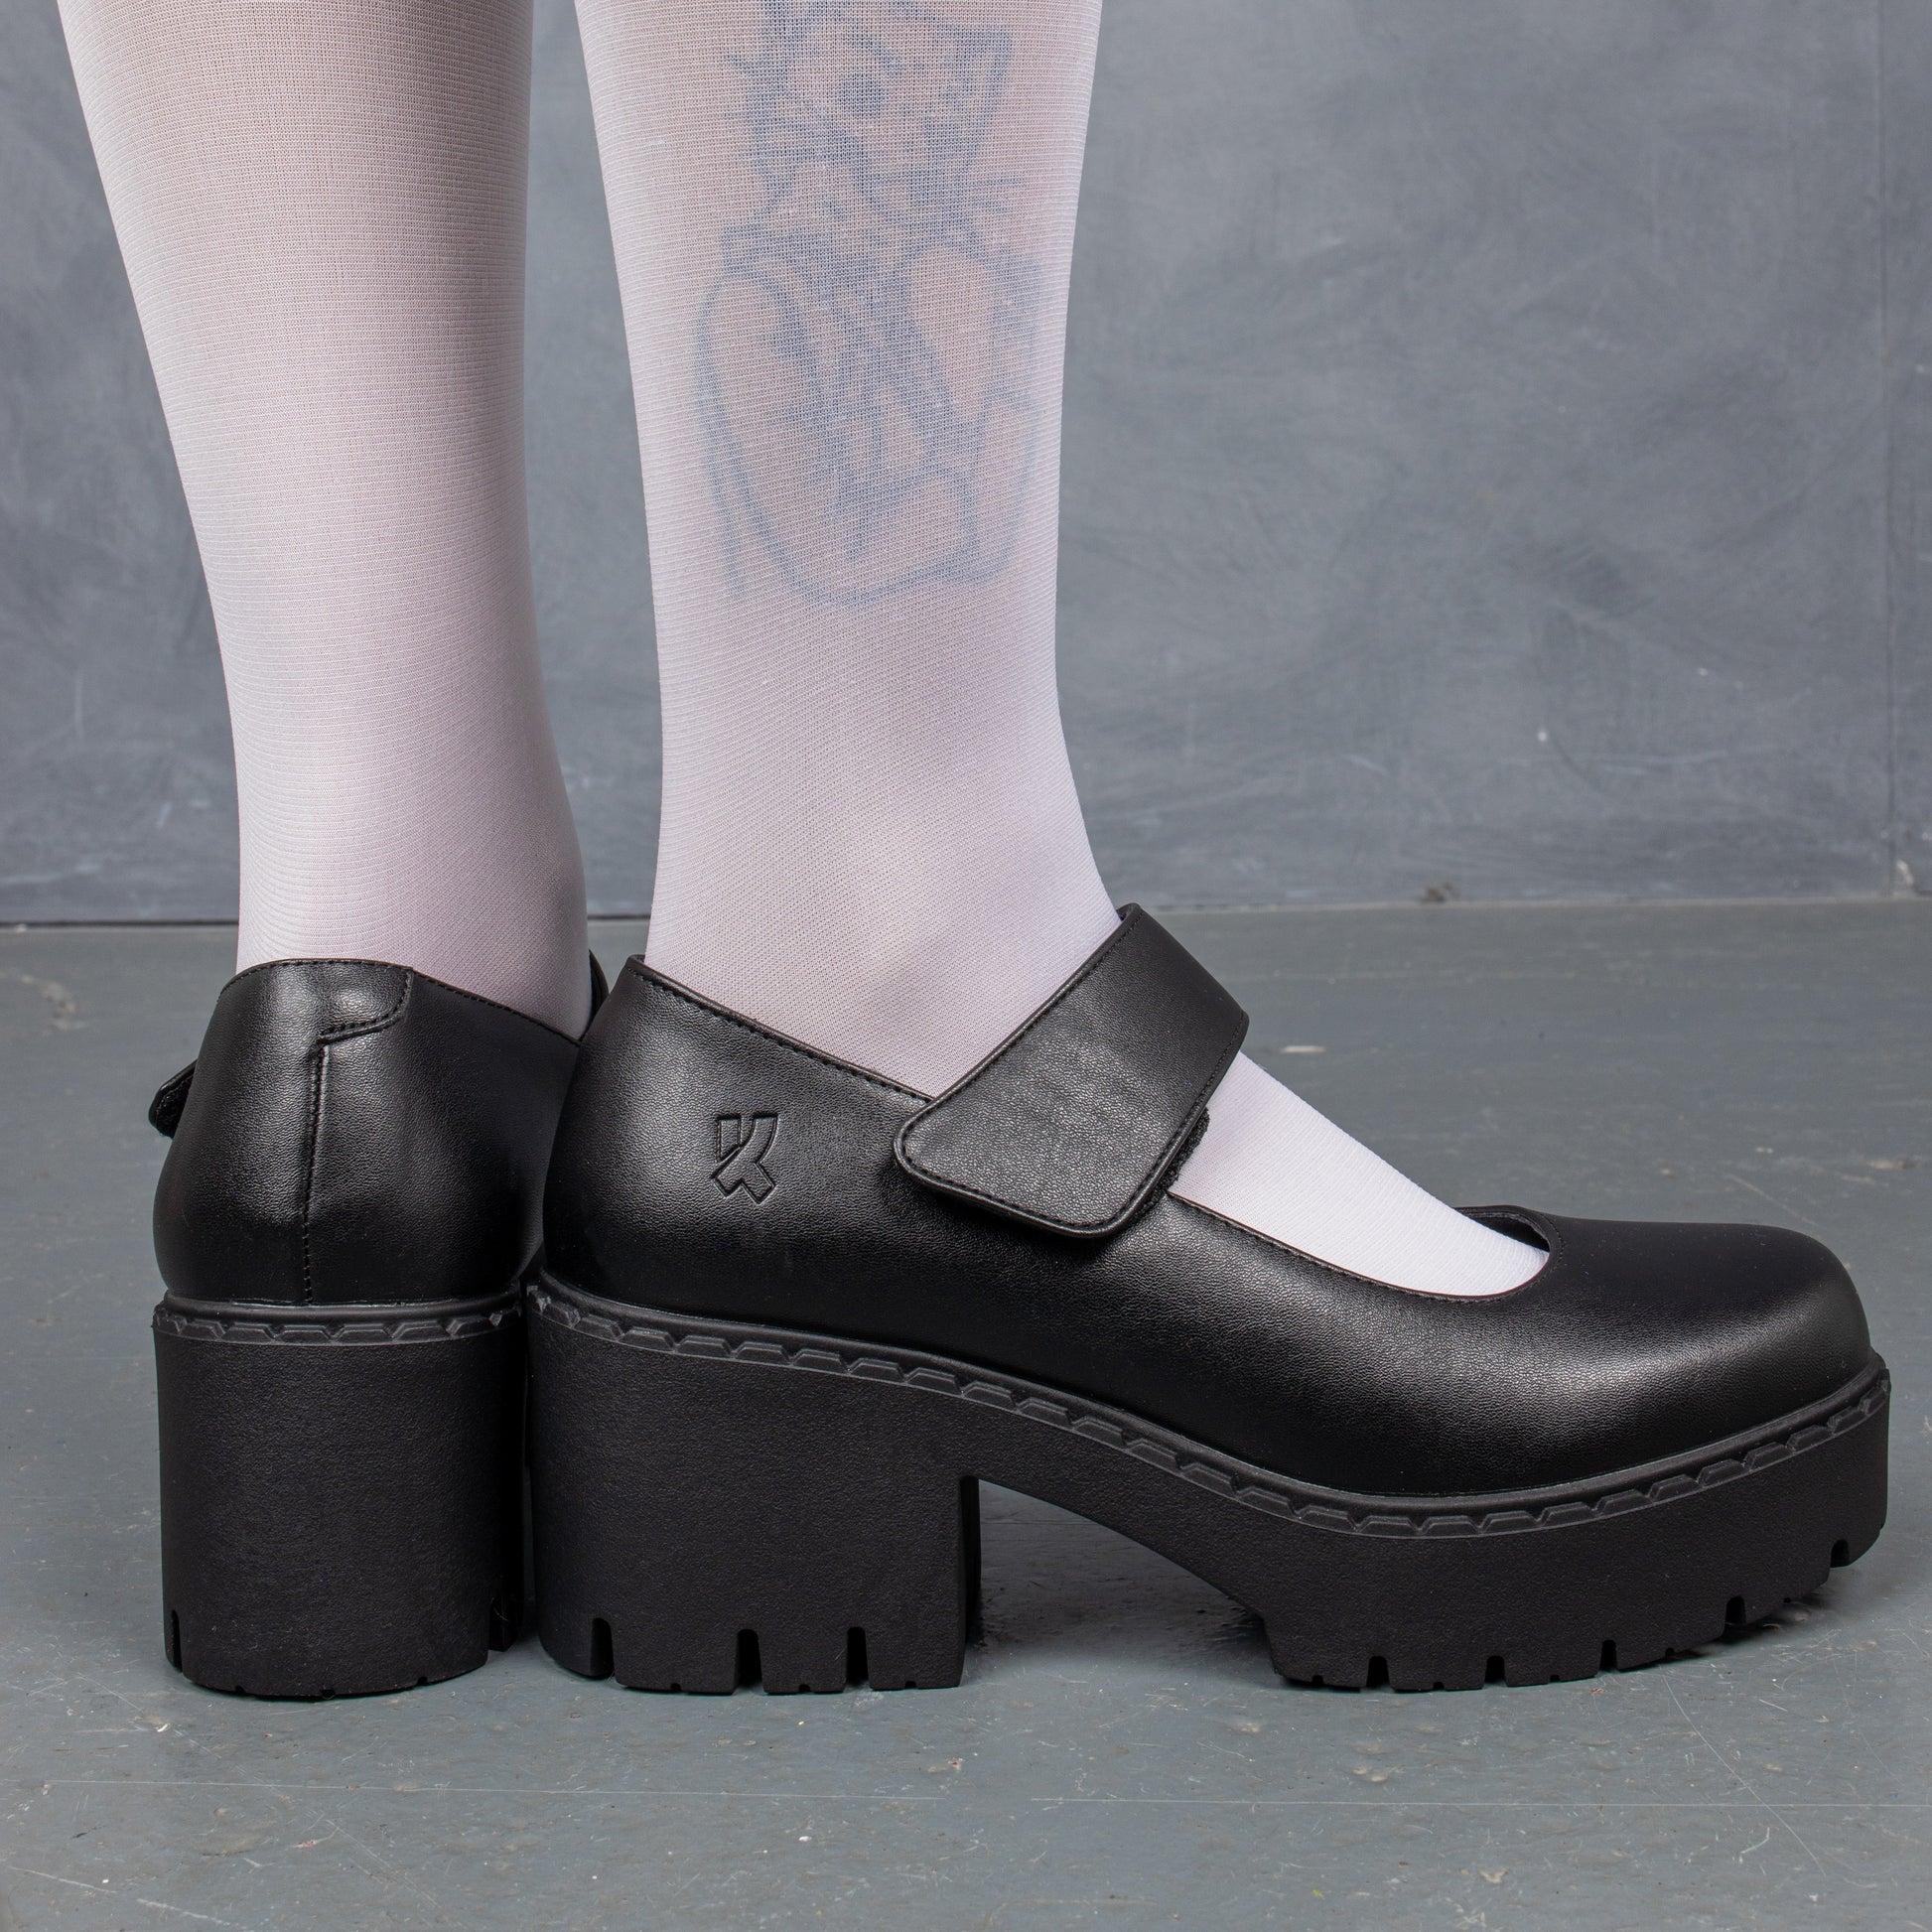 Beacons Switch Mary Jane Shoes - Mary Janes - KOI Footwear - Black - Back and Side View